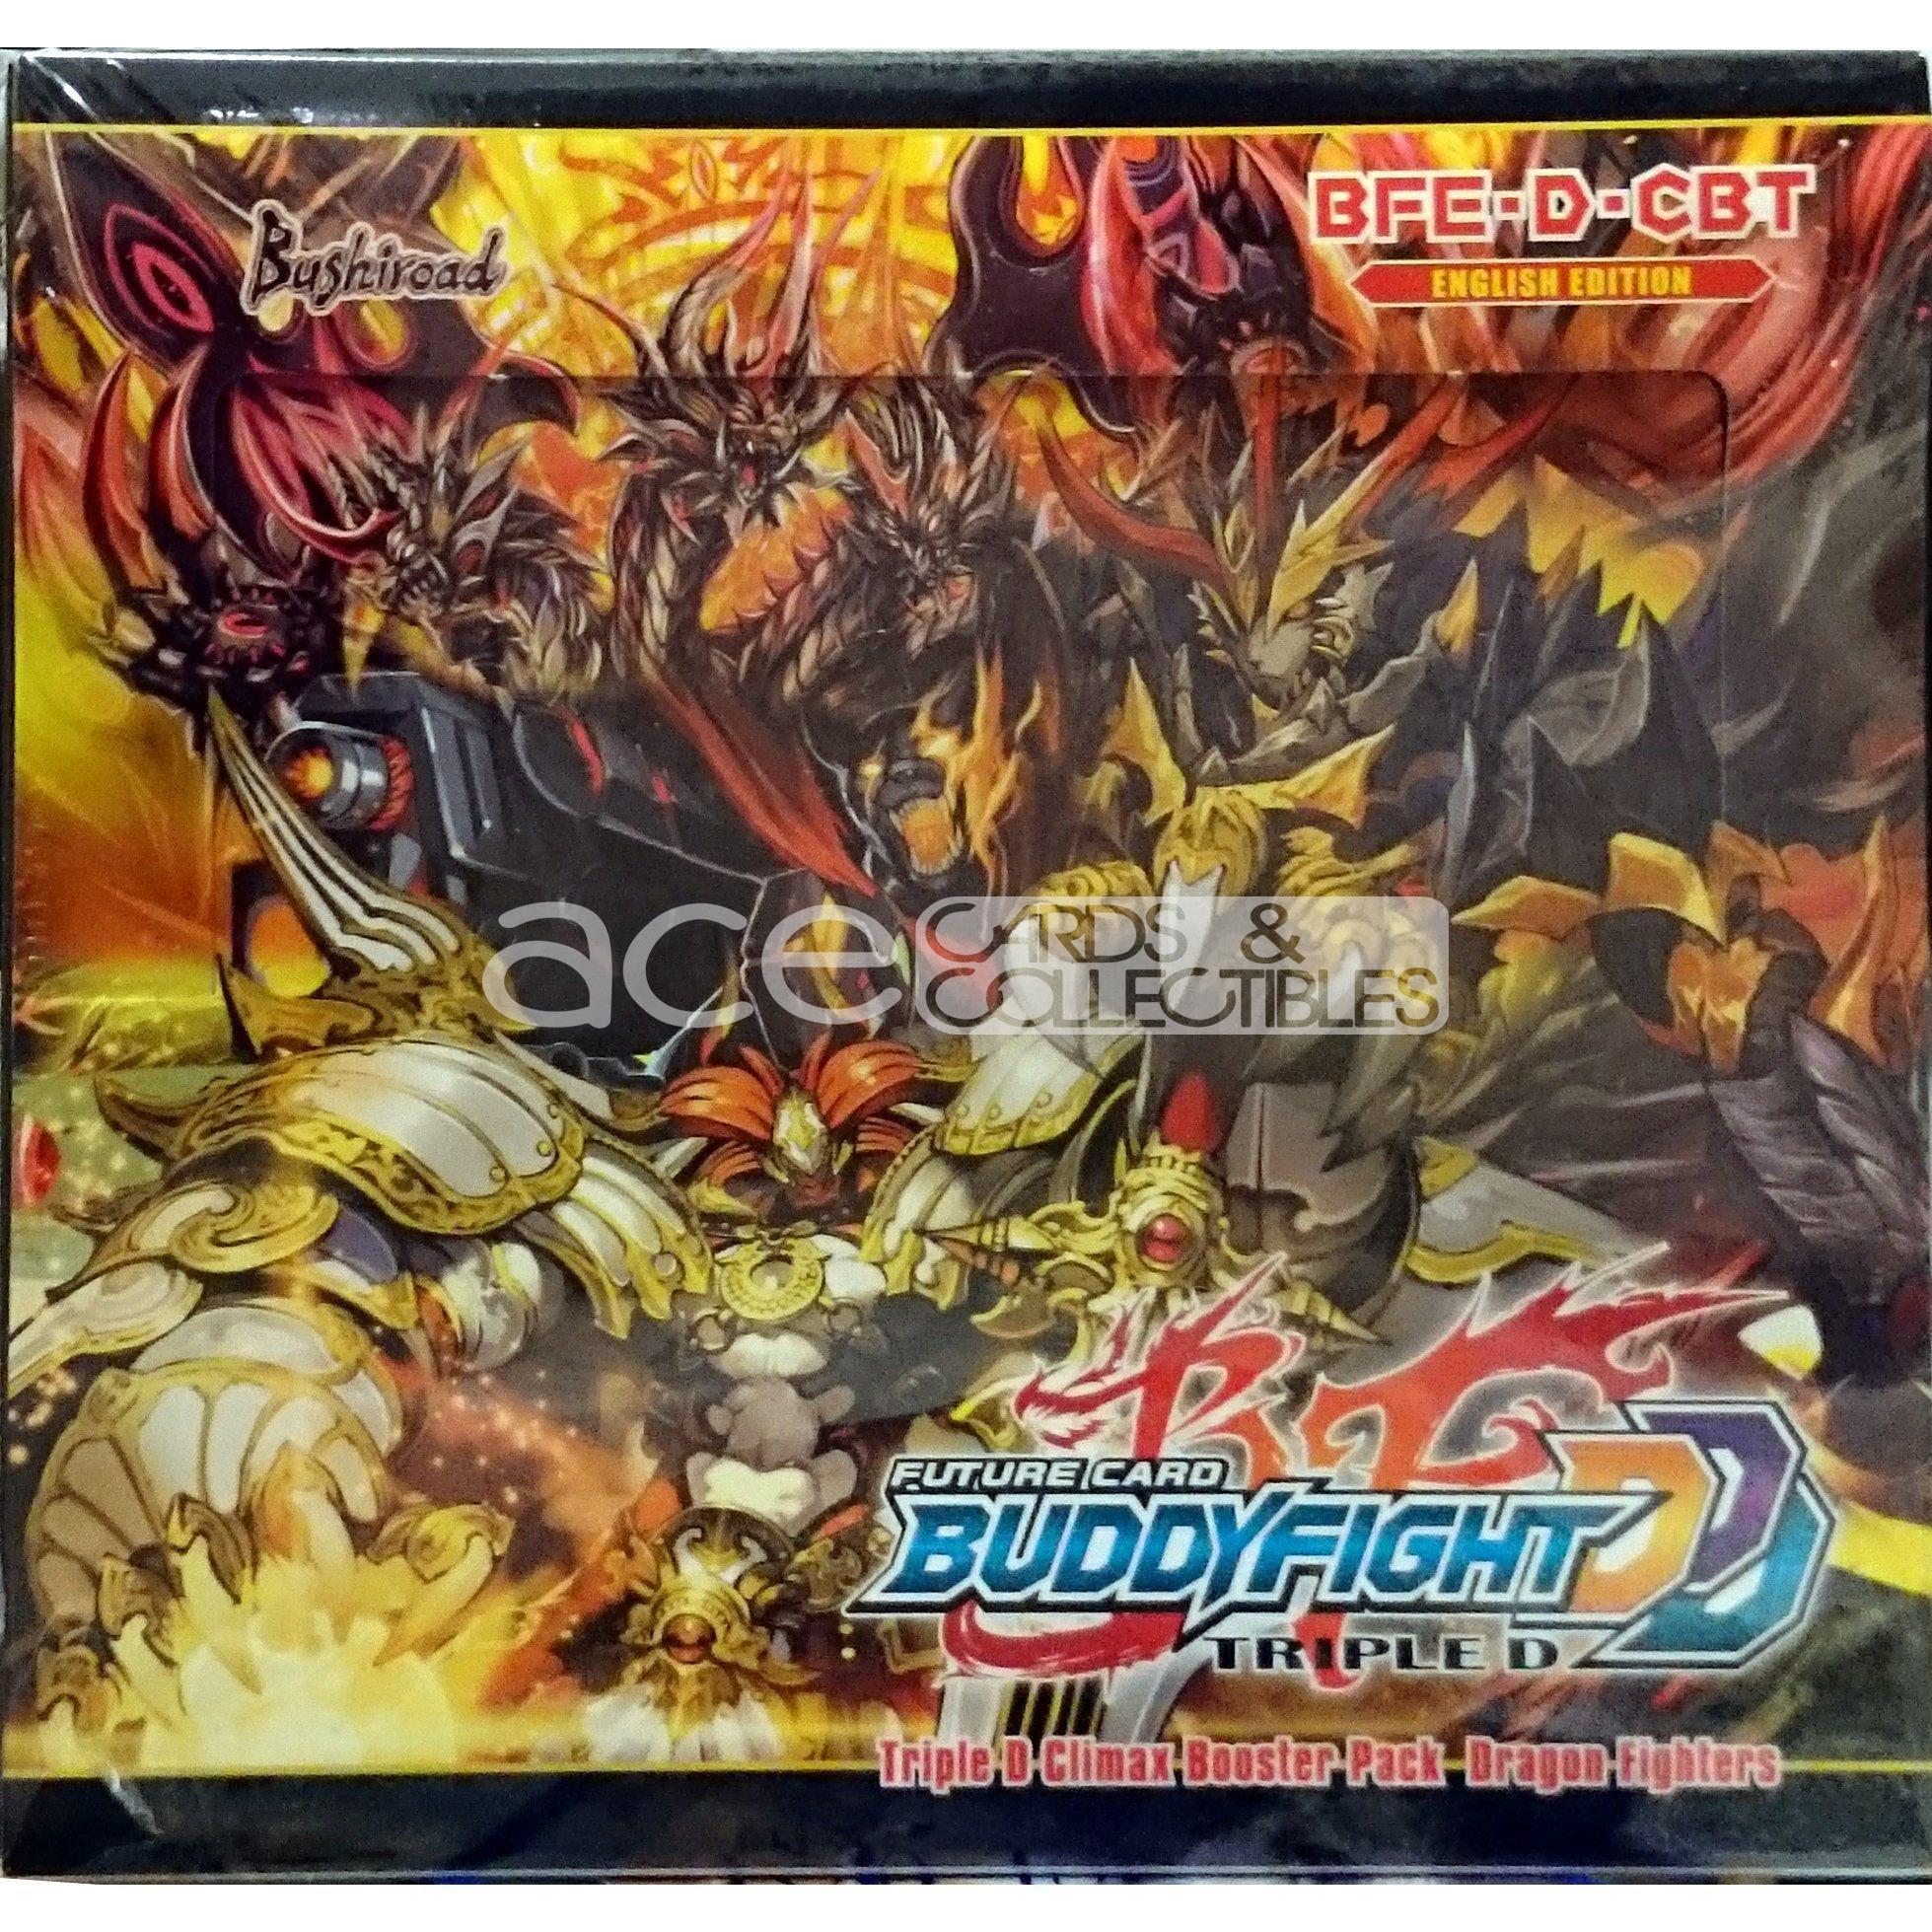 Future Card Buddyfight D Dragon Fighters [BFE-D-CBT] (English)-Single Pack (Random)-Bushiroad-Ace Cards & Collectibles